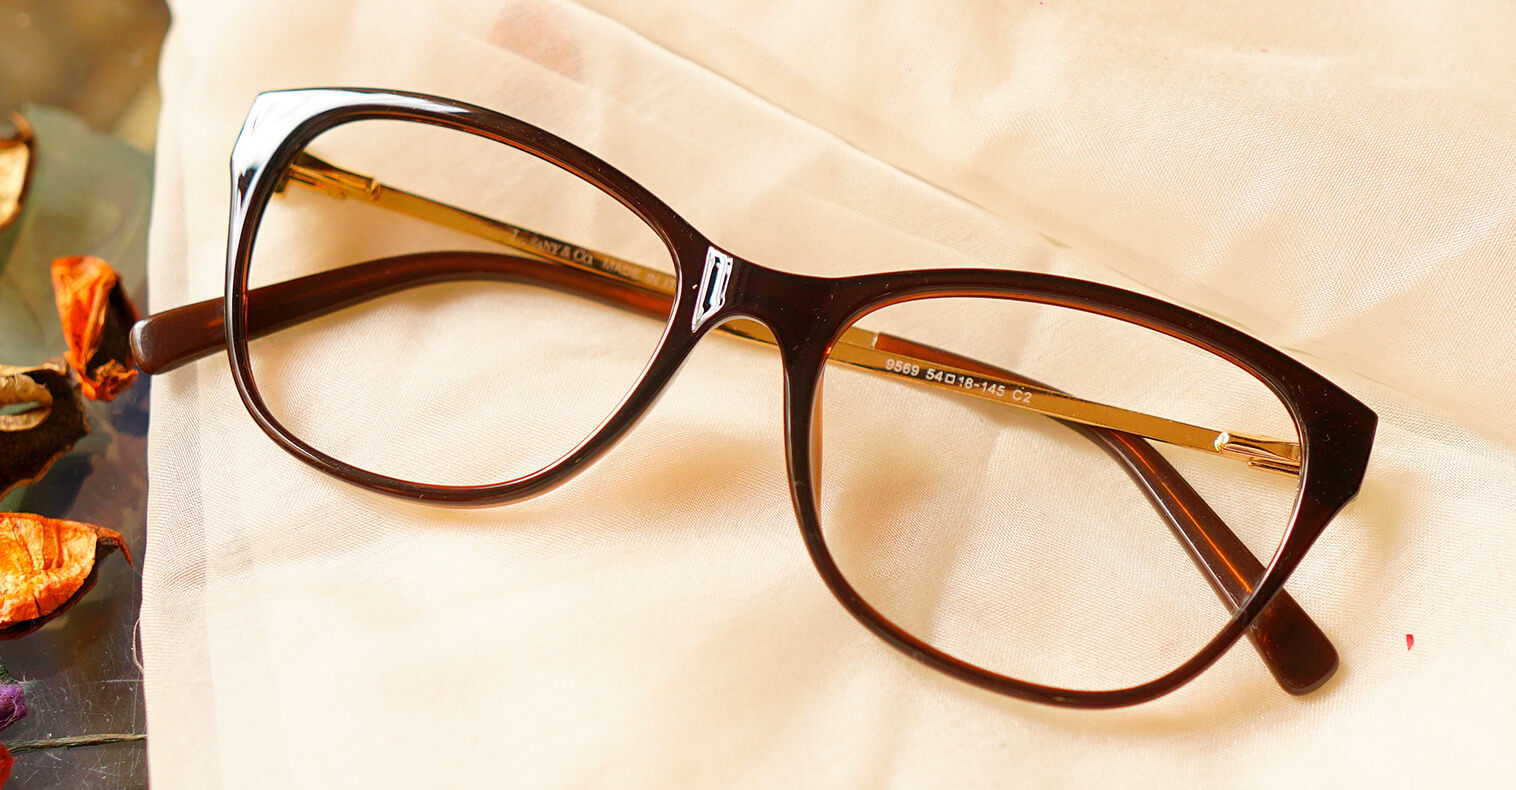 Crystalline brown eyeglasses placed on the table